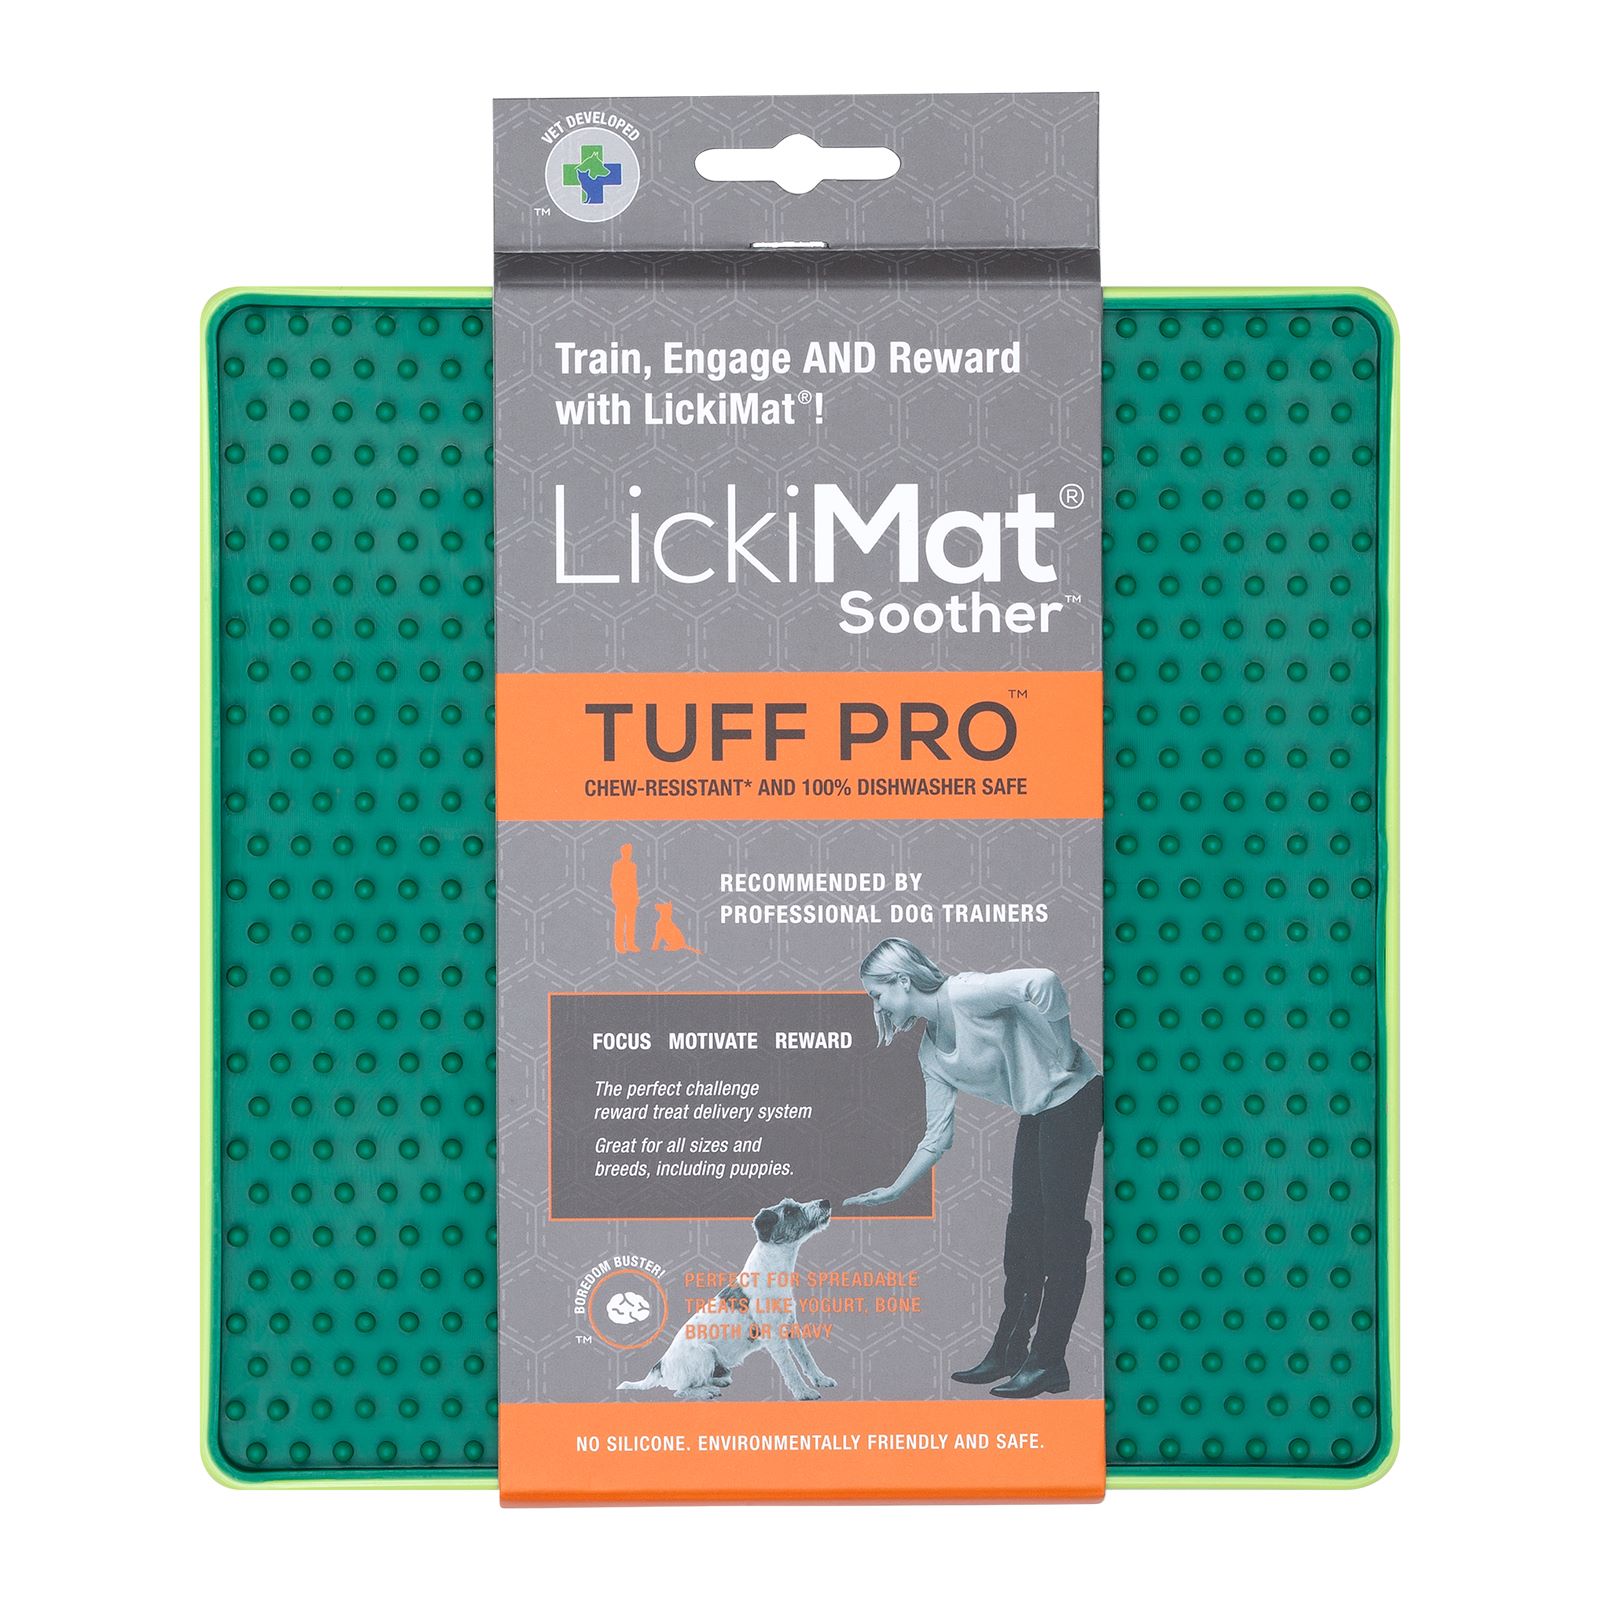 LickiMat Soother PRO Tuff Slow Food Licking Mat for Dogs image 0